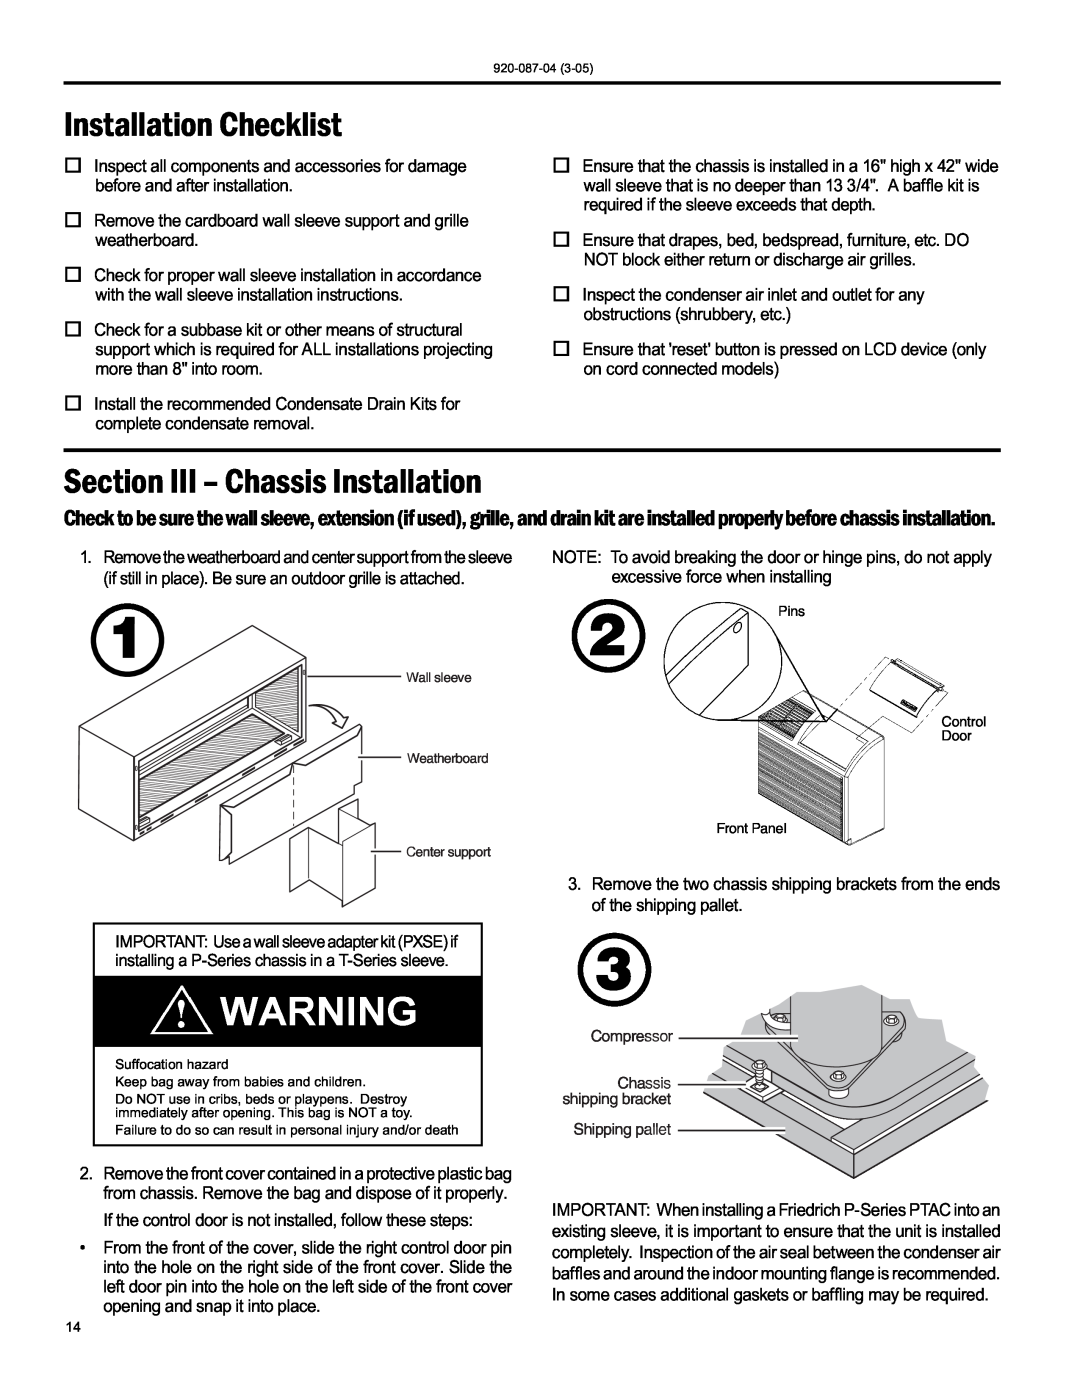 Friedrich 920-087-04 (3-05) manual Installation Checklist, Section III – Chassis Installation, Shipping pallet 